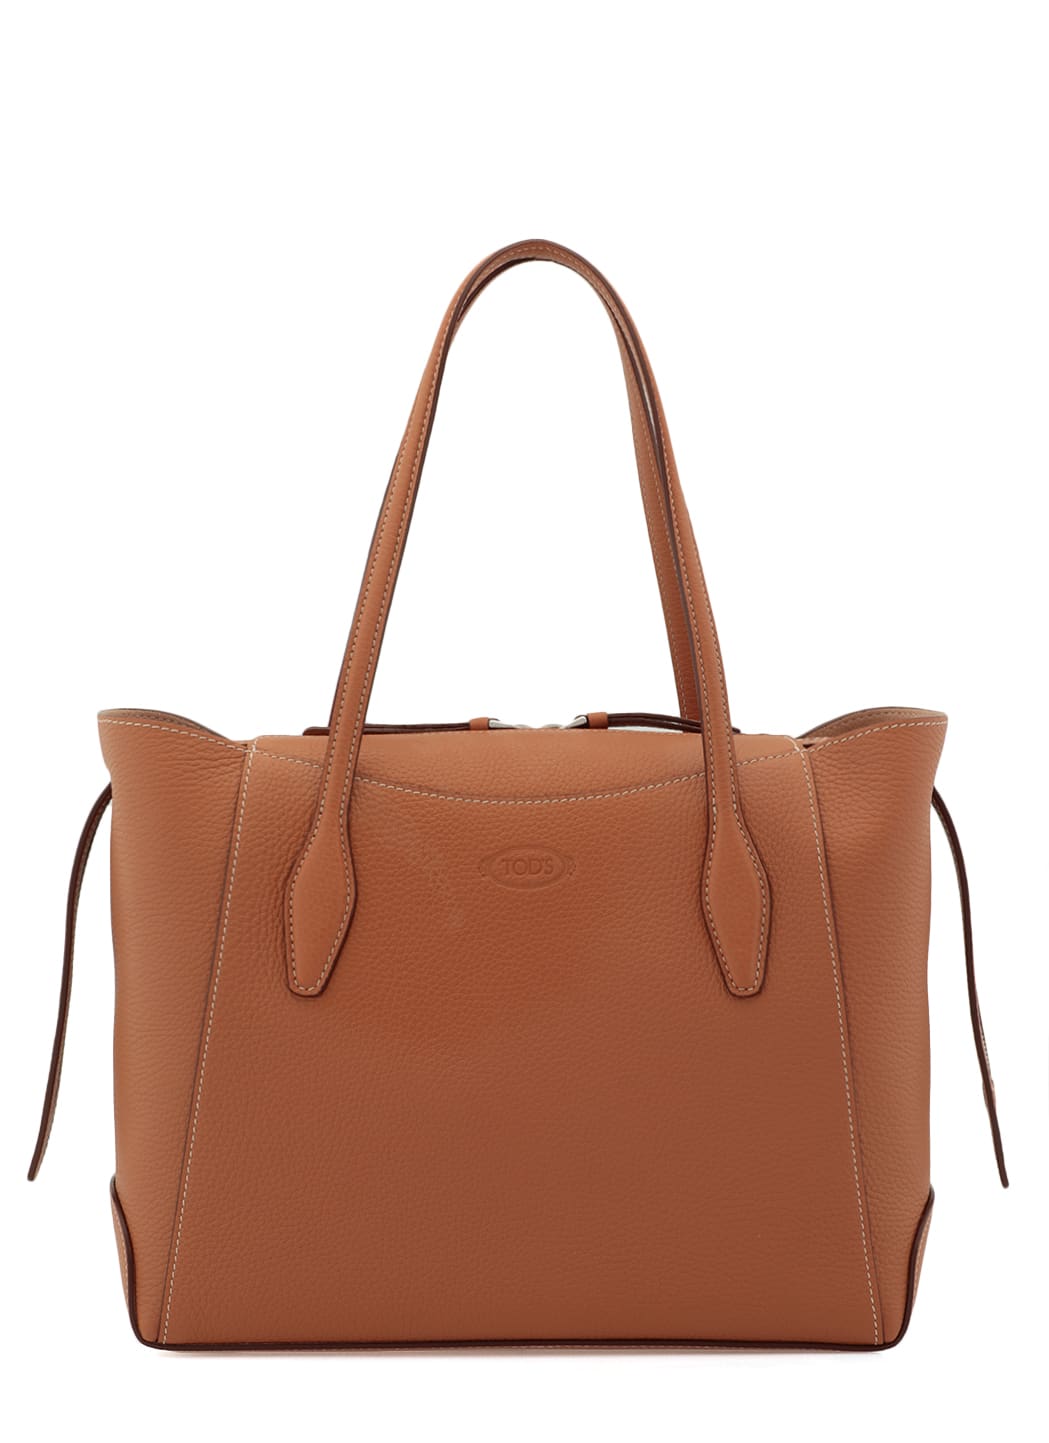 Tods Leather Shopping Bag